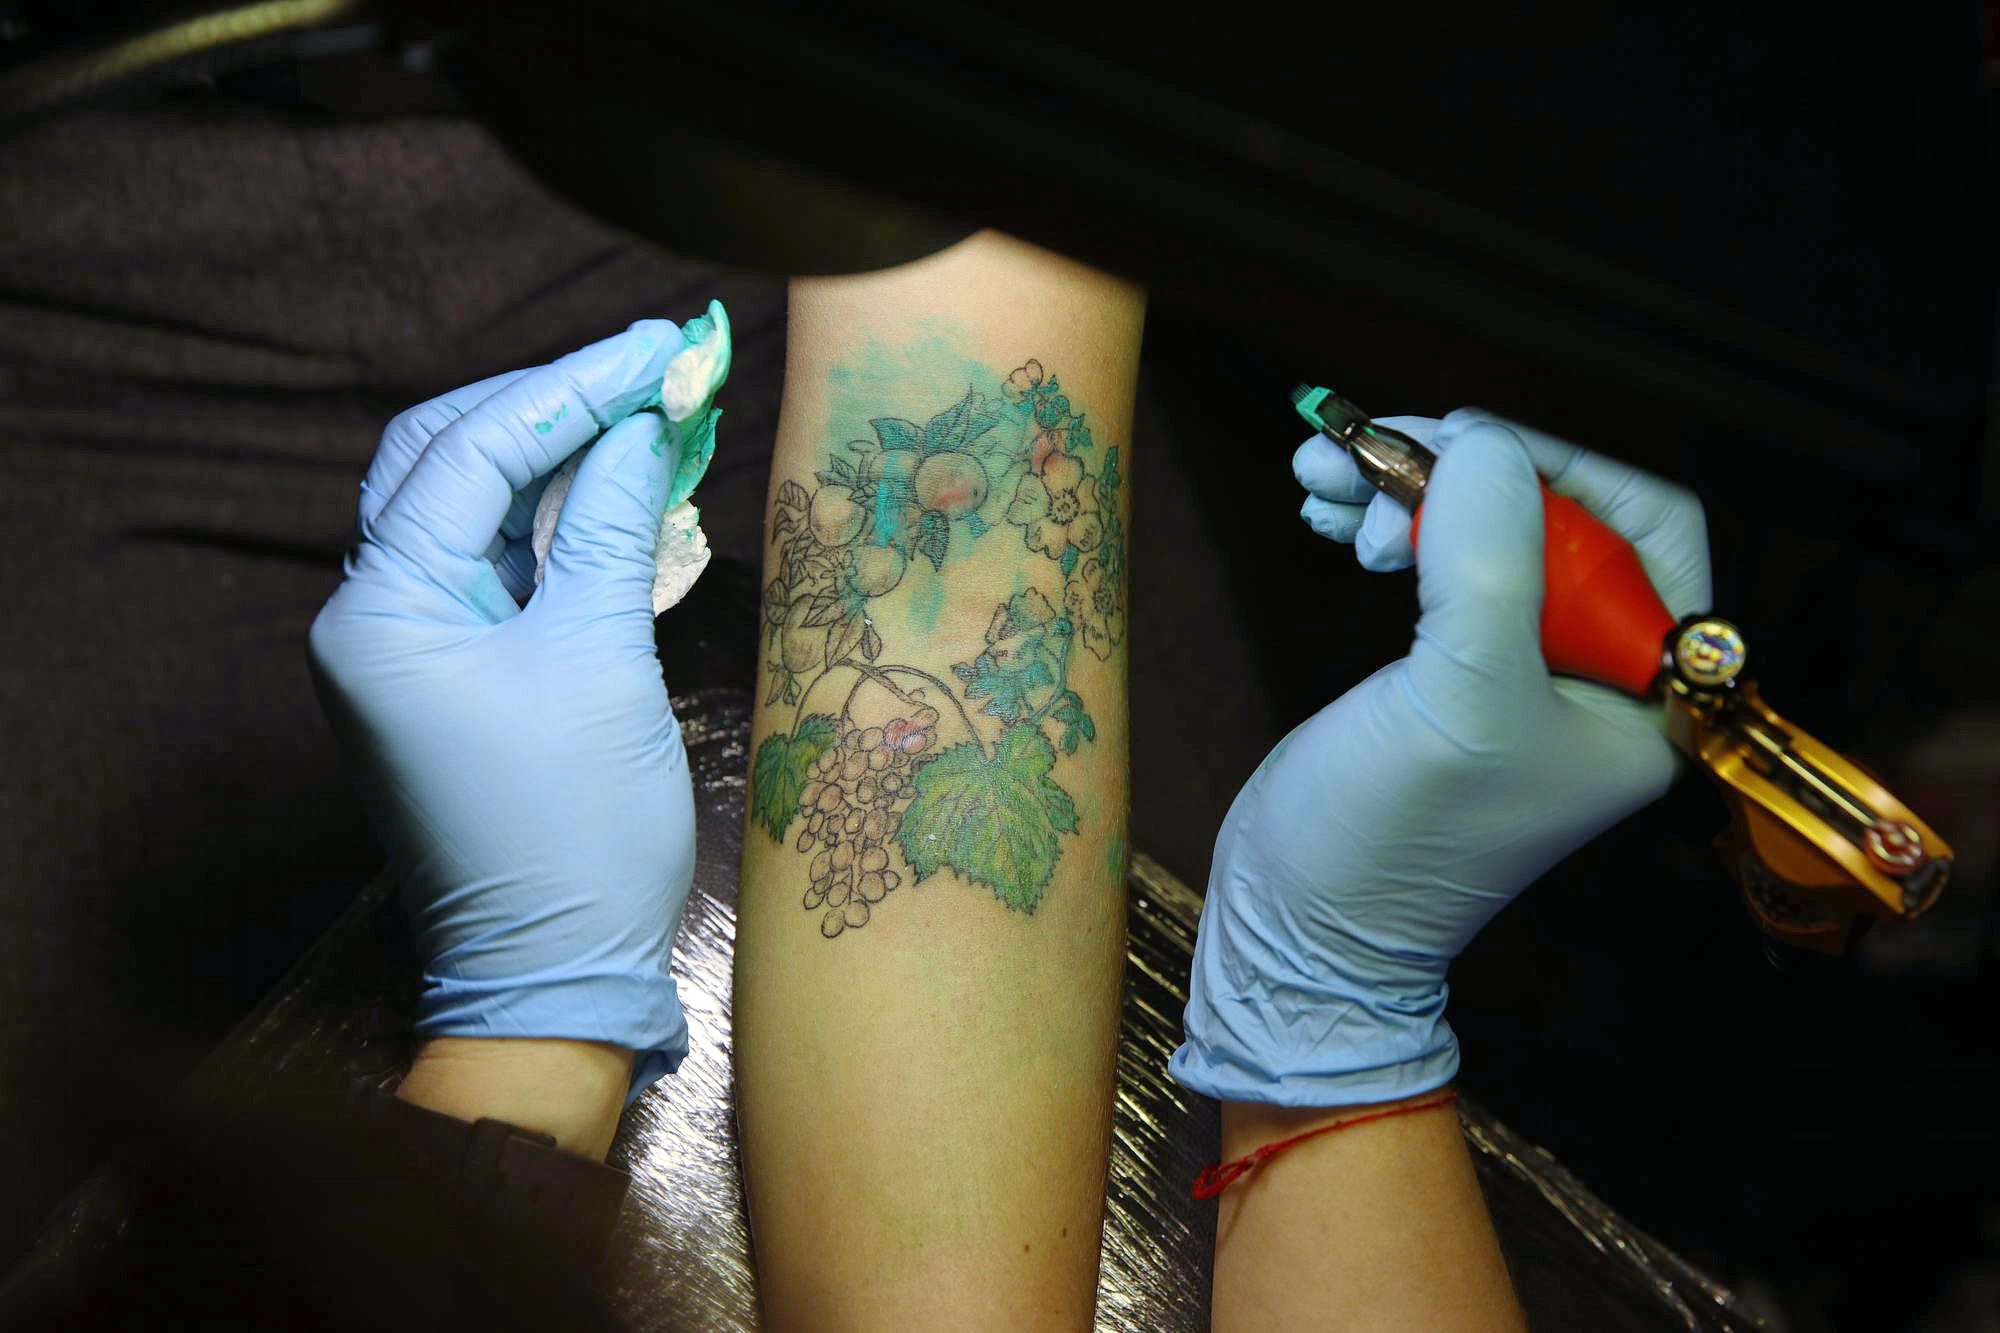 Klementina Kvindt, the participant of the program that covers scars of violence victims with tattoos, has chosen for her tattoo branches of dog-rose because in Selam, the language of flowers, it stands for “heal my wounds” and Kvindt hopes it will symbolize the healing of her own wounds.